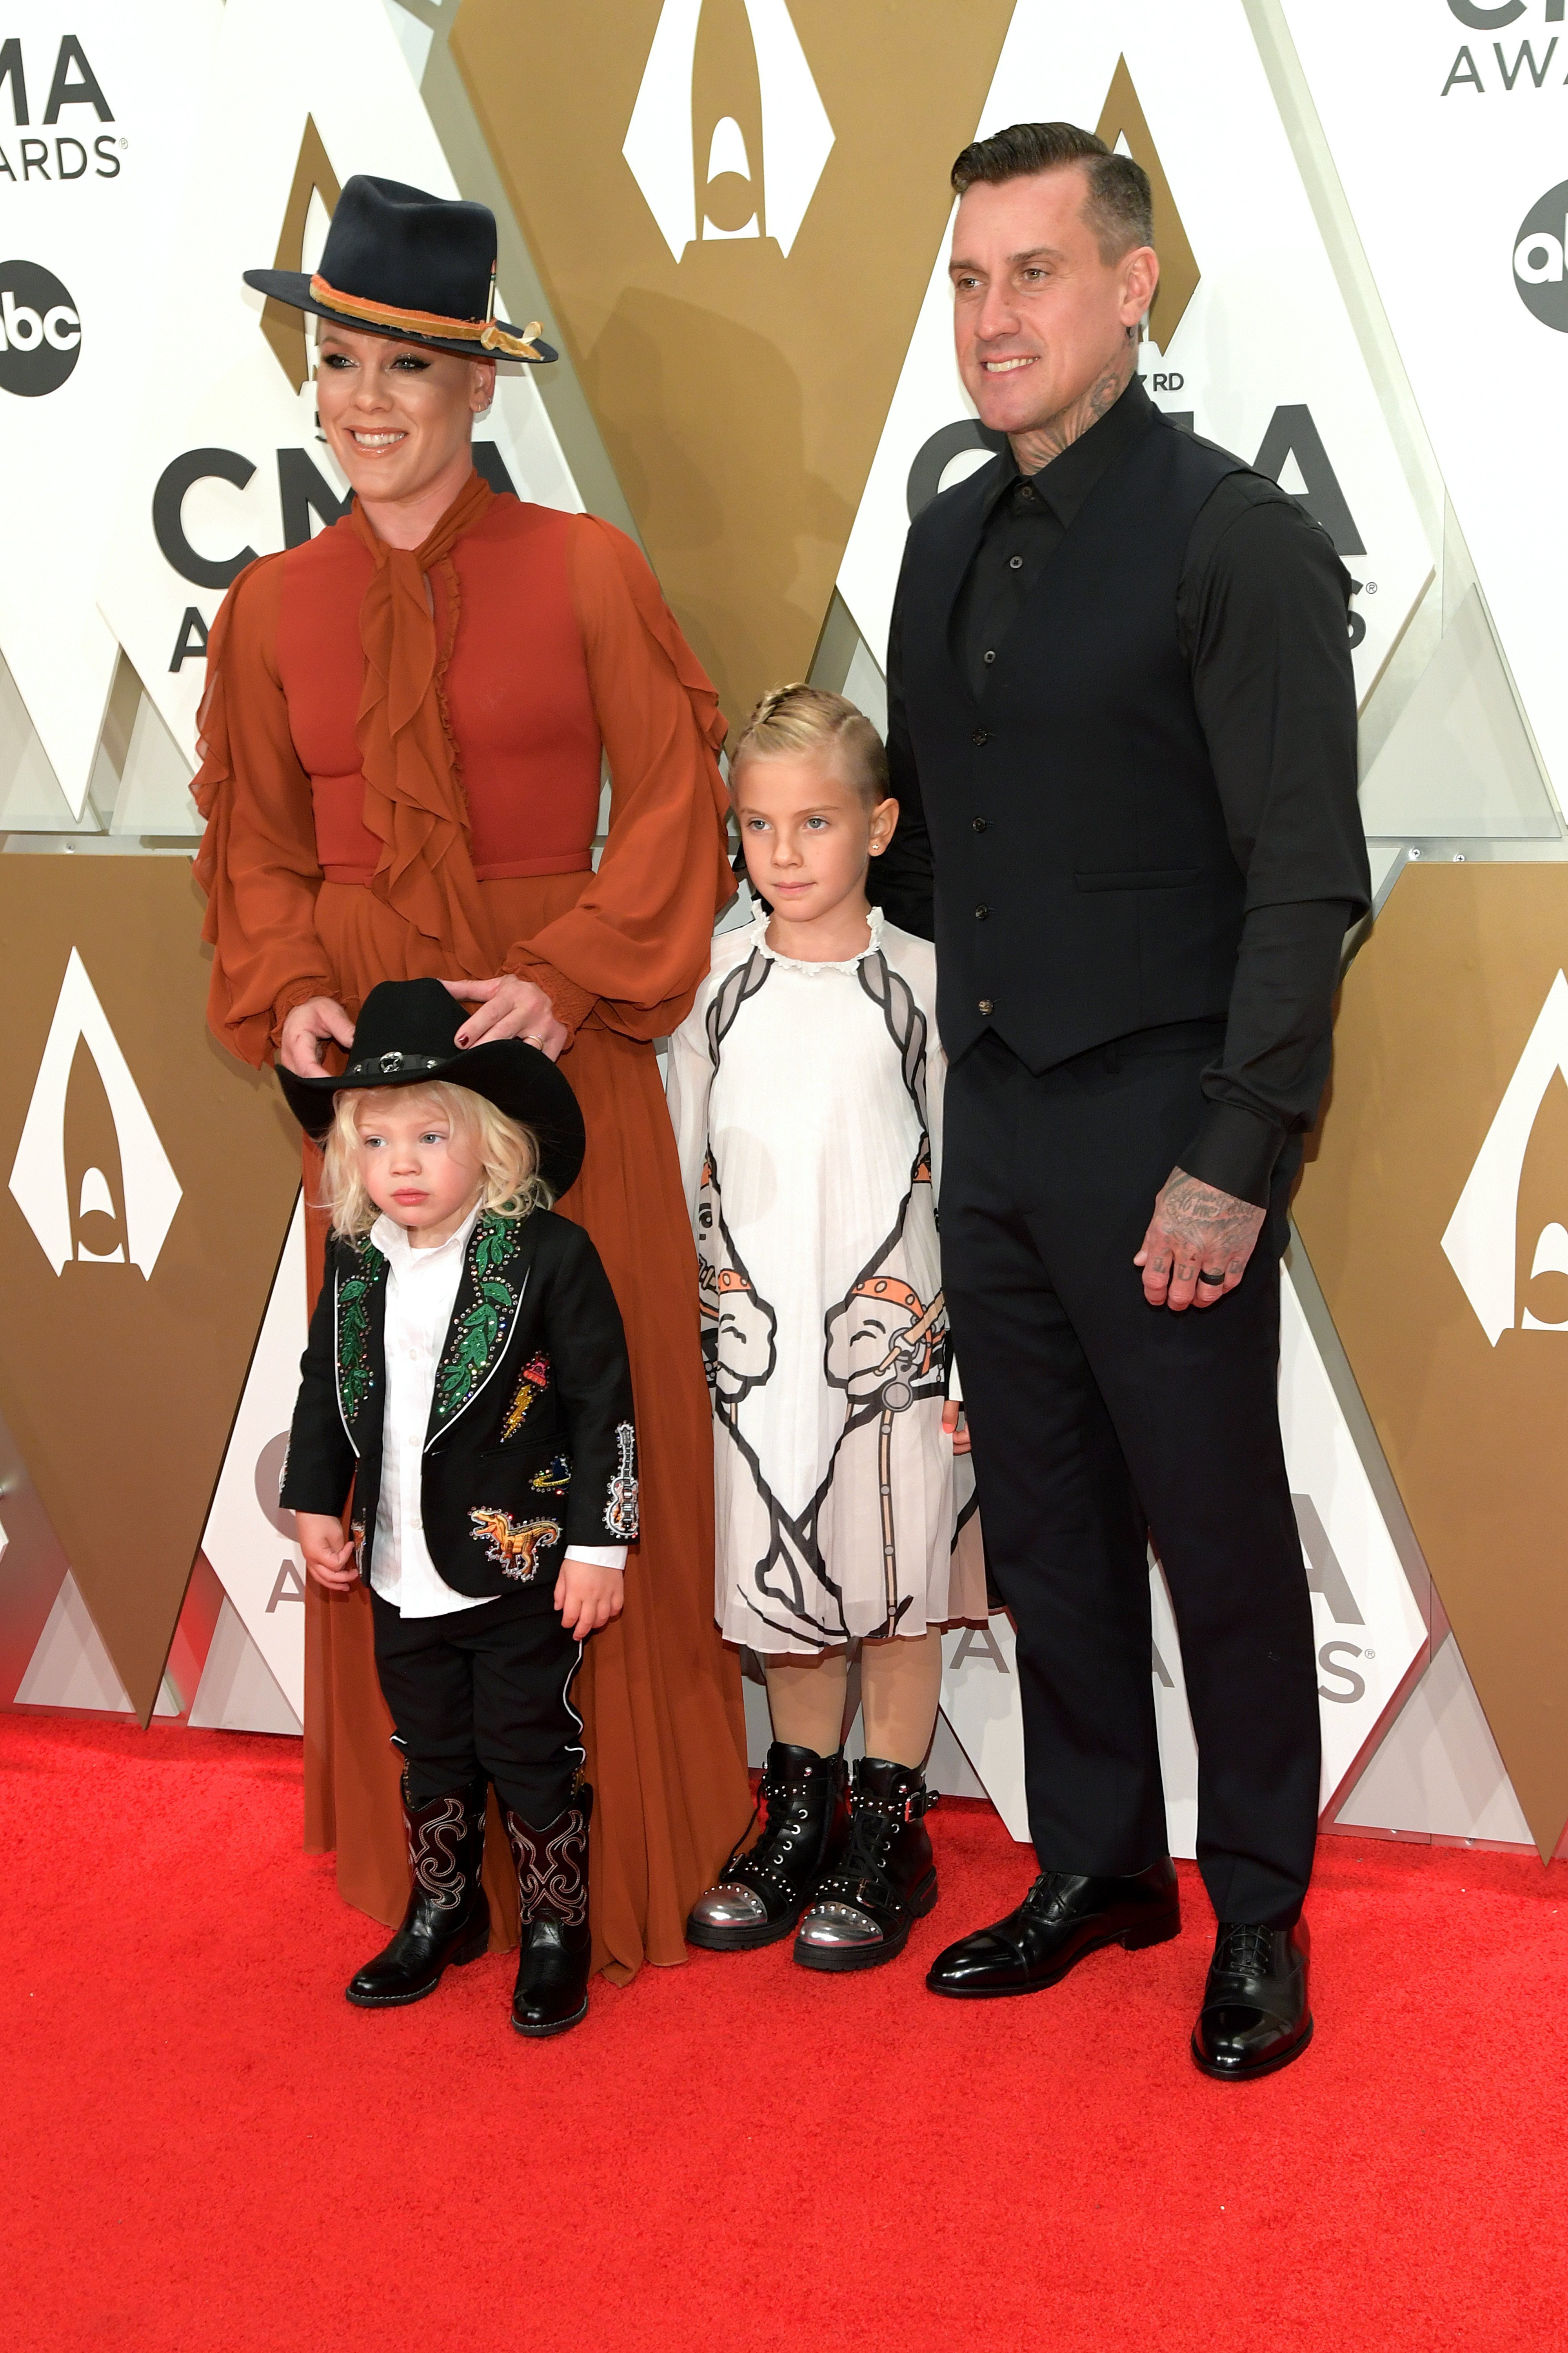 Jameson Hart, Willow Hart, P!nk and Carey Hart attend the 53rd annual CMA Awards at the Music City Center on November 13, 2019, in Nashville, Tennessee. | Source: Getty Images.